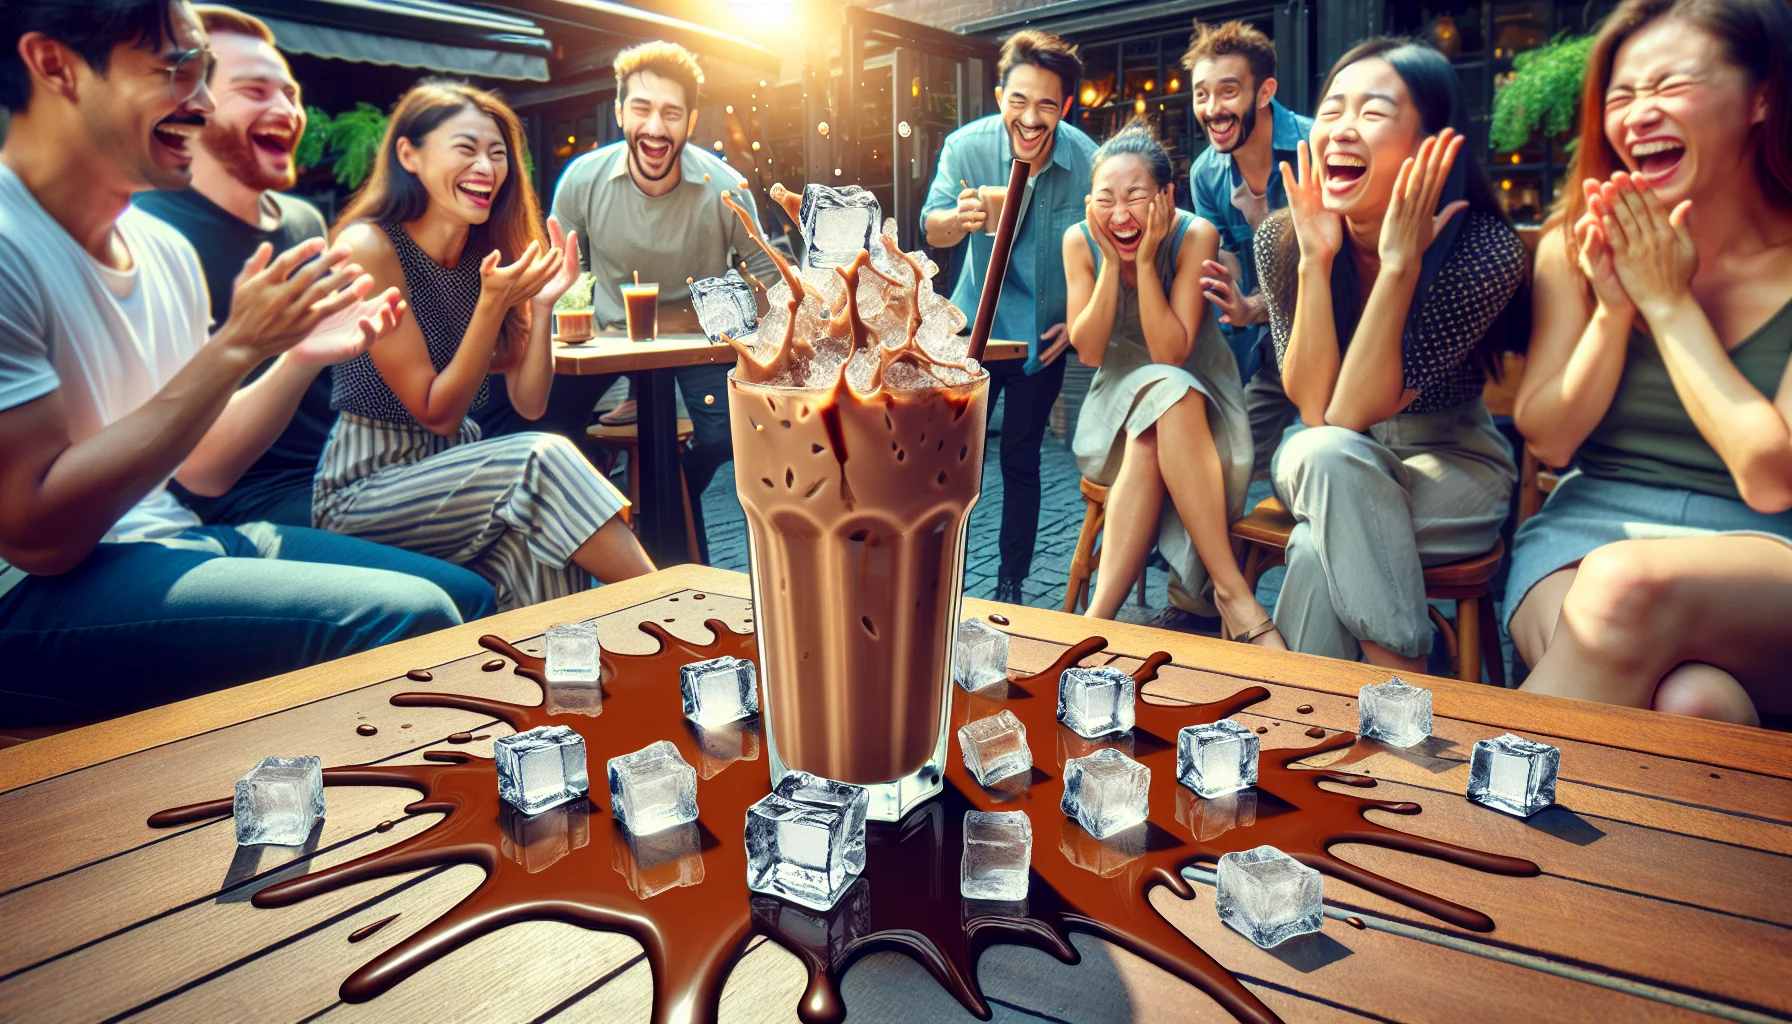 Generate a humorous and inviting image depicting an amusing event centred around an iced mocha. The scene shows the icy, rich brown beverage in a tall, stylish glass, clumsily spilled over a wood table in an outdoor café. Sunlight gleams off shiny ice cubes scattered around and the frothy mocha creates an interesting, abstract pattern on the table. Surrounding this scene are people of various genders, races and ages, laughing and pointing at the spectacle, appearing both amused and enticed, their expressions vivid and expressive.